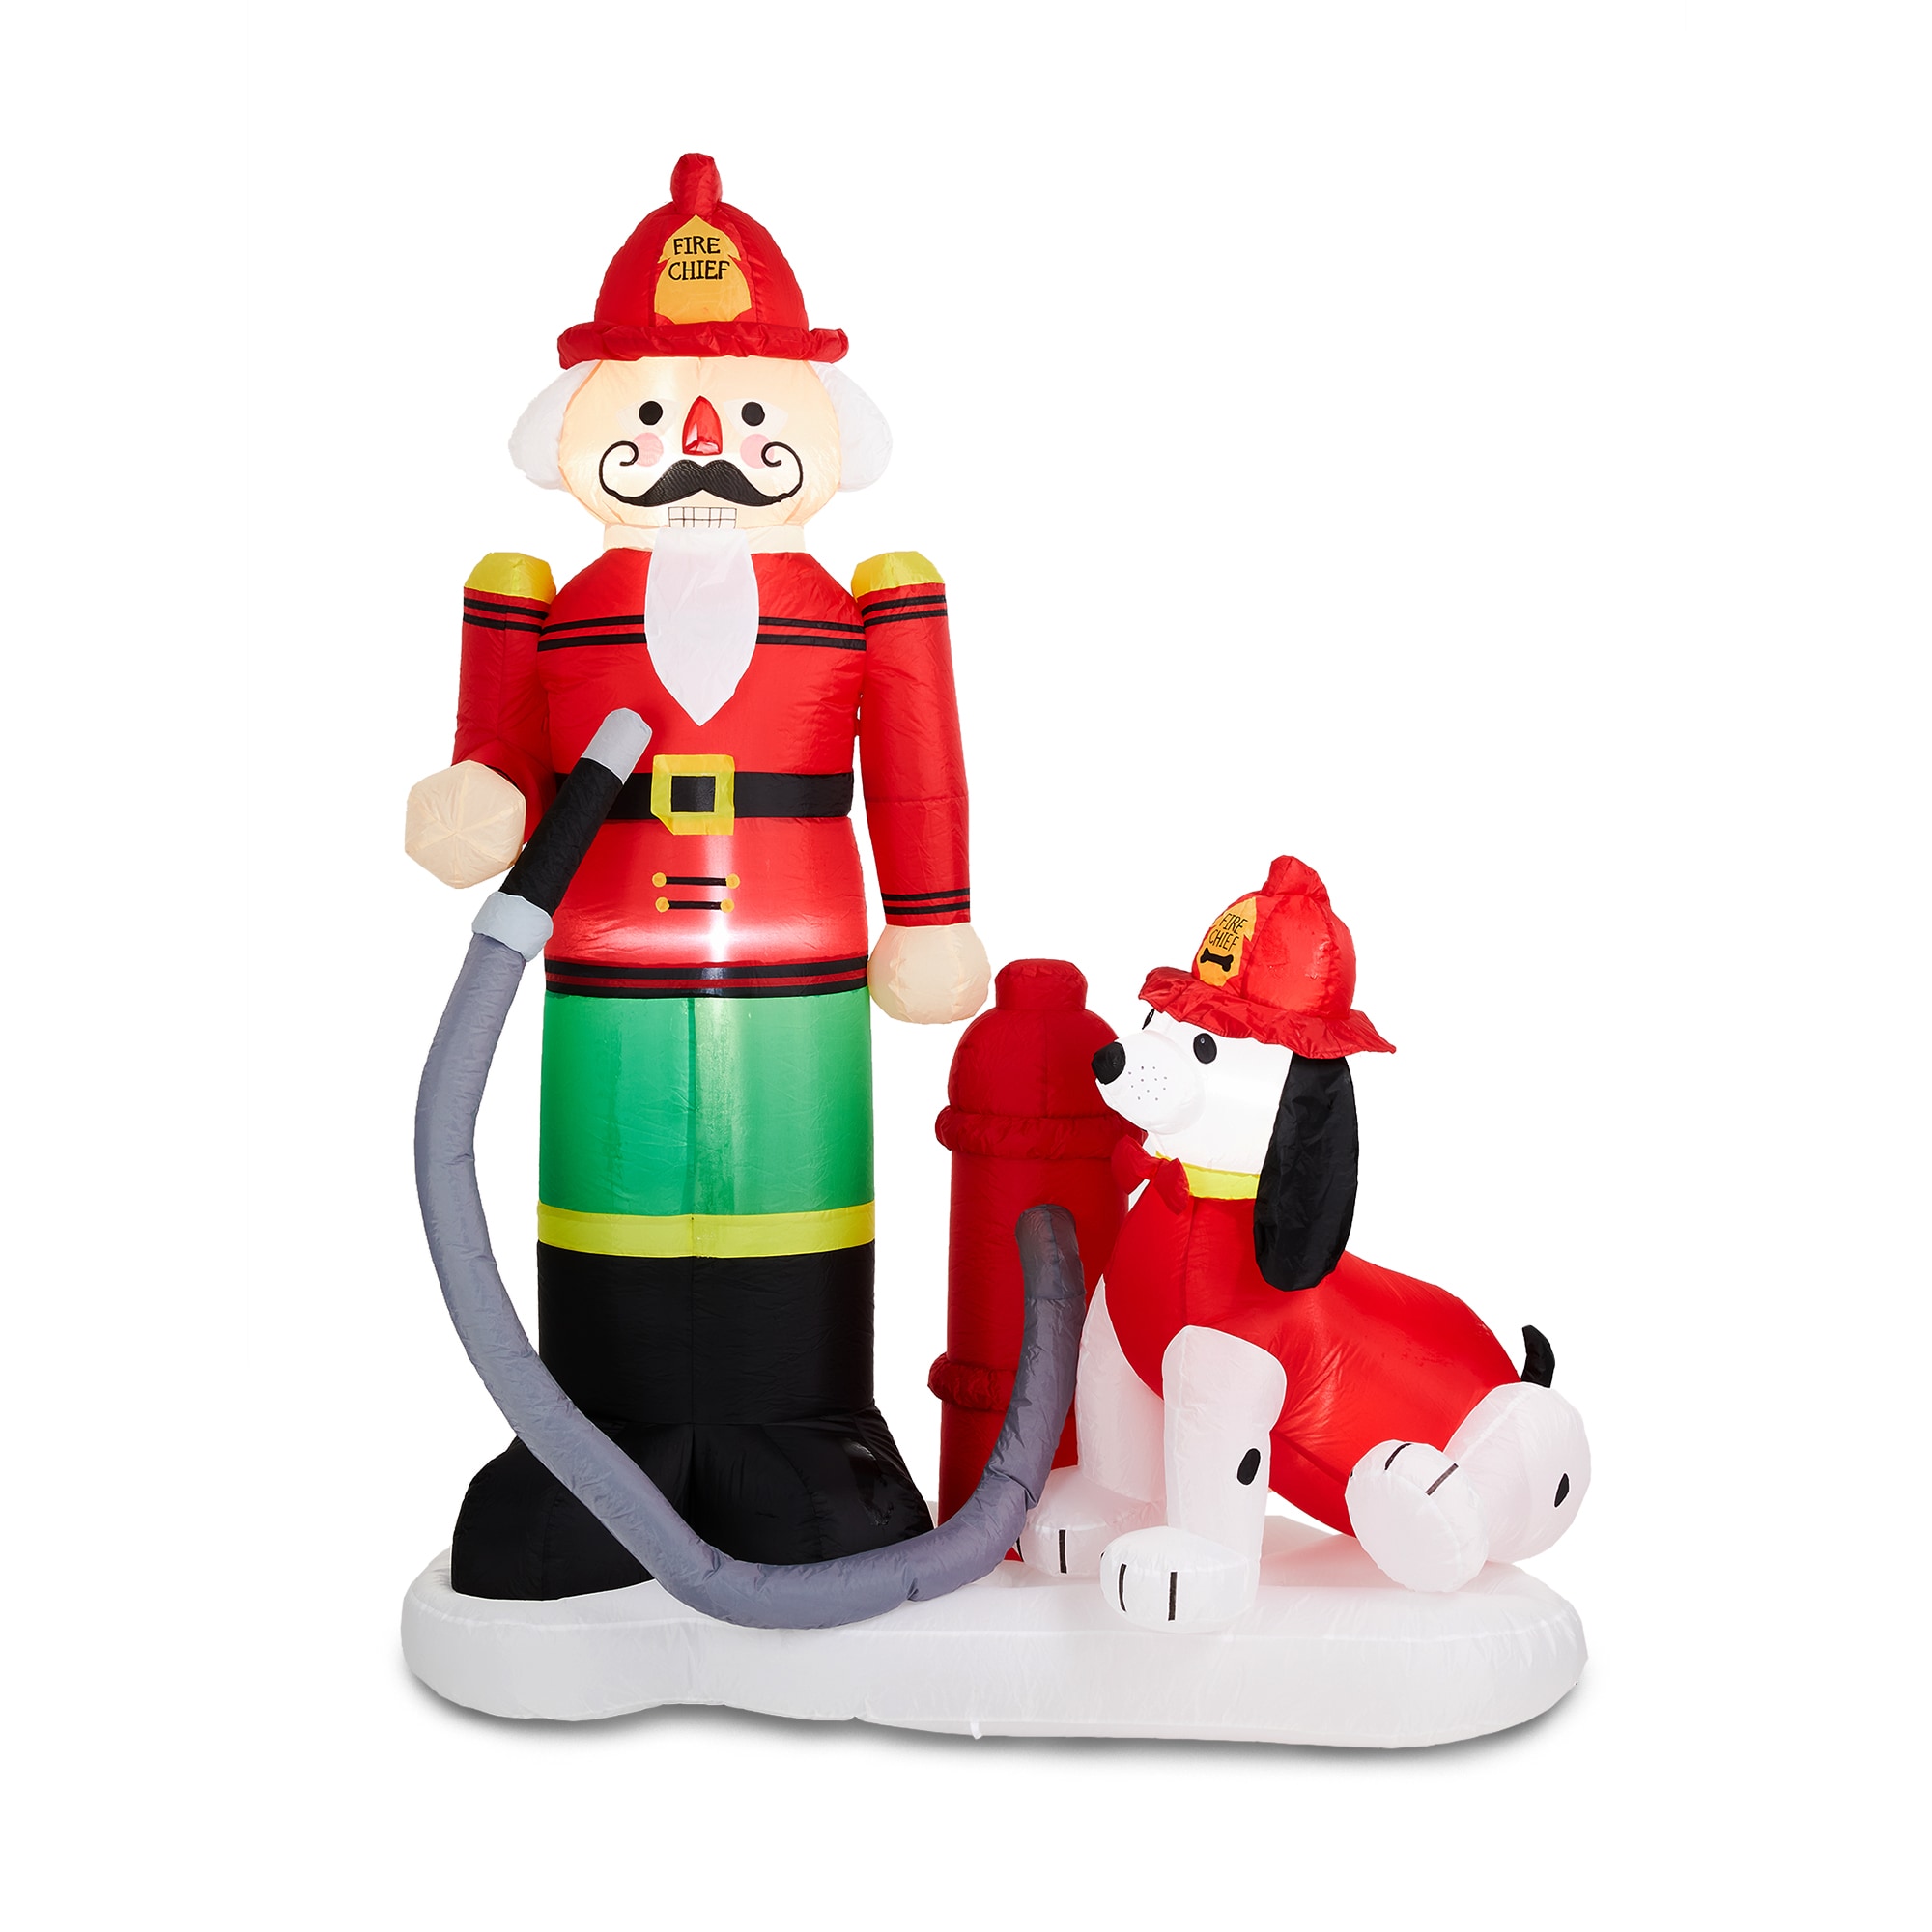 Is Selling an 8-Foot Inflatable Nutcracker That Will Be the Star of  Your Christmas Decor